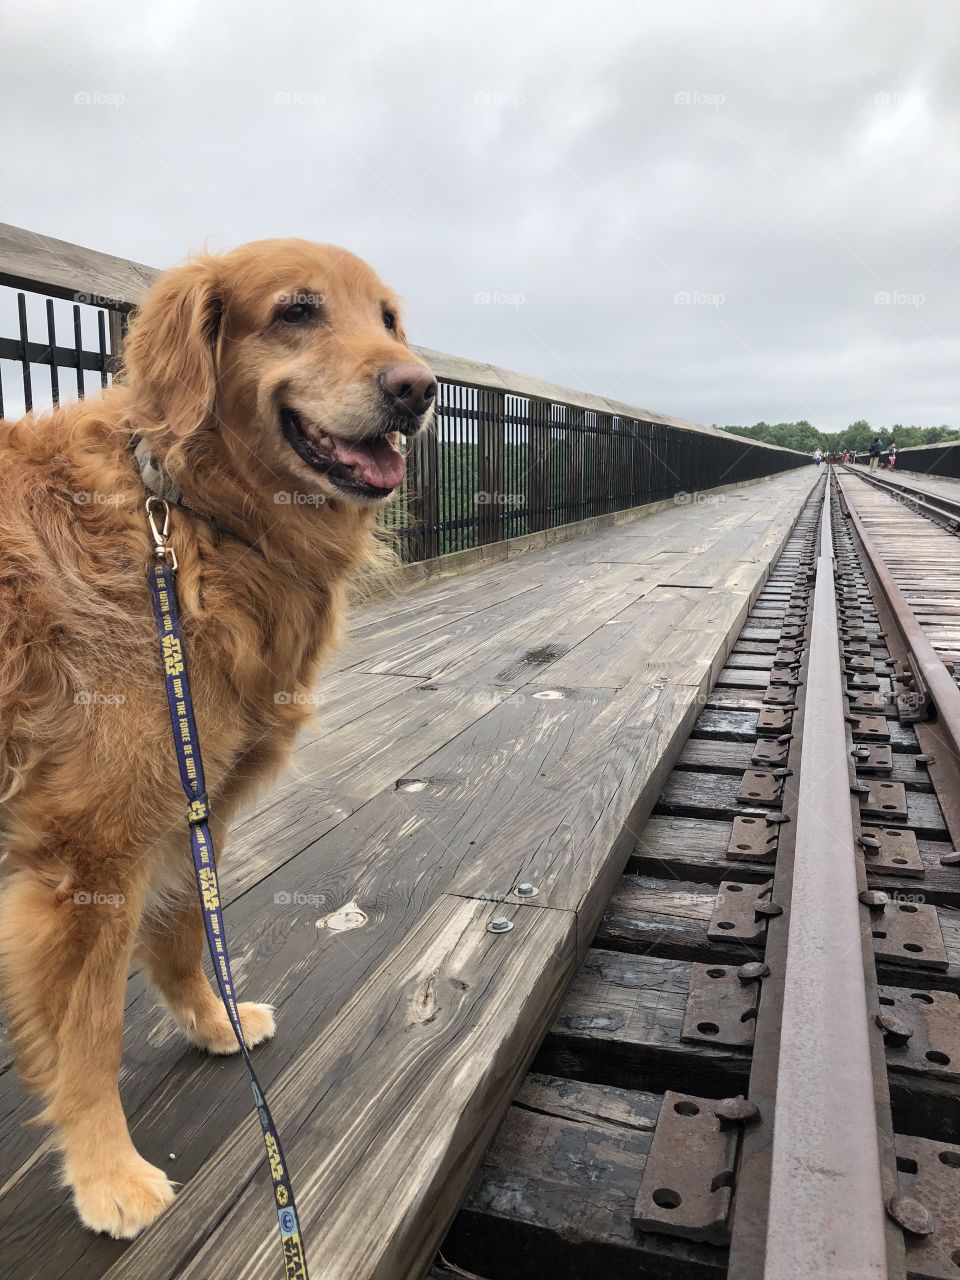 Walking along the old tracks 